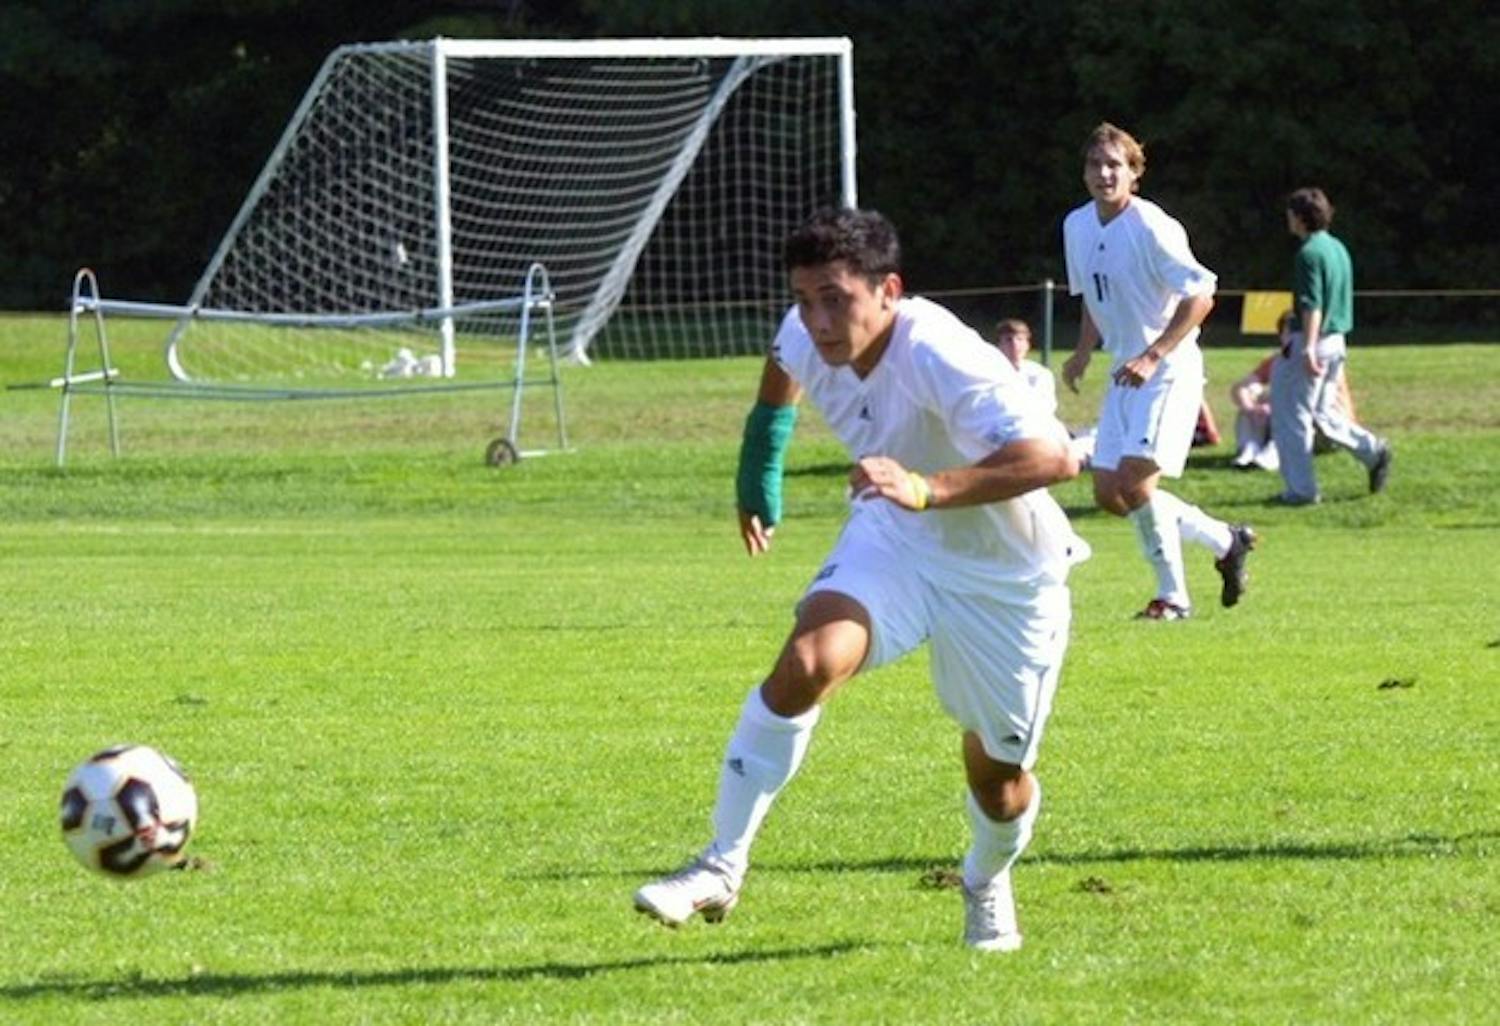 Tom Lobben '08 will attempt to help the men's soccer team score a win over Brown on Saturday.